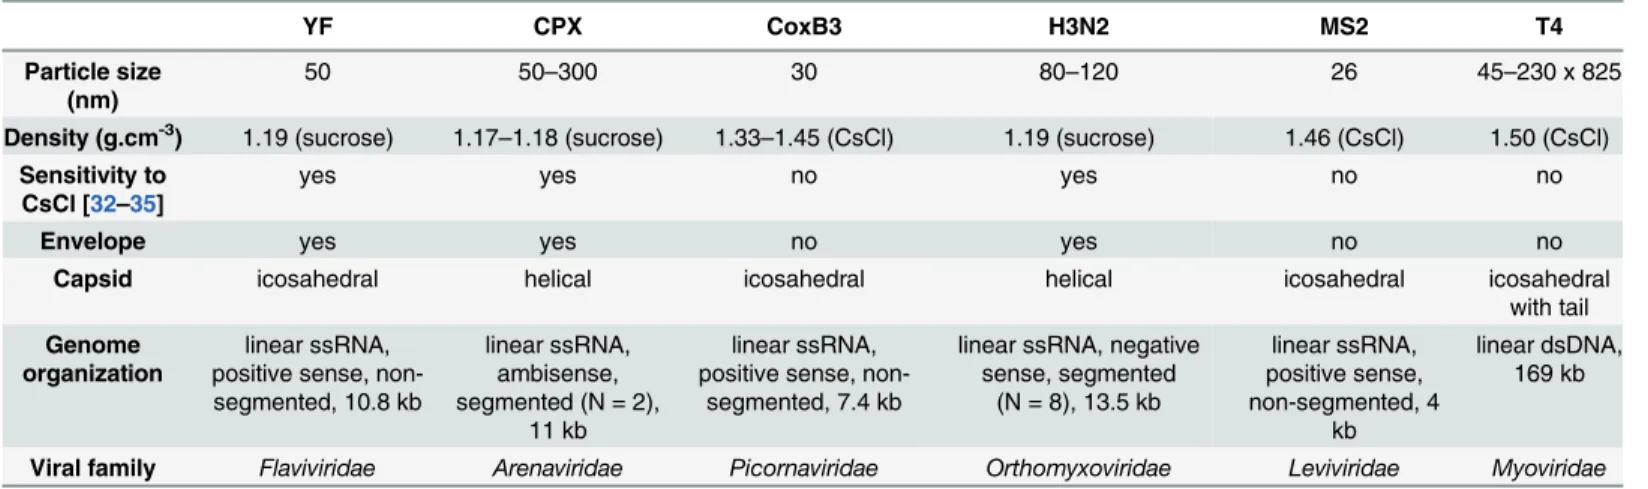 Table 1. Characteristics of reference viruses.